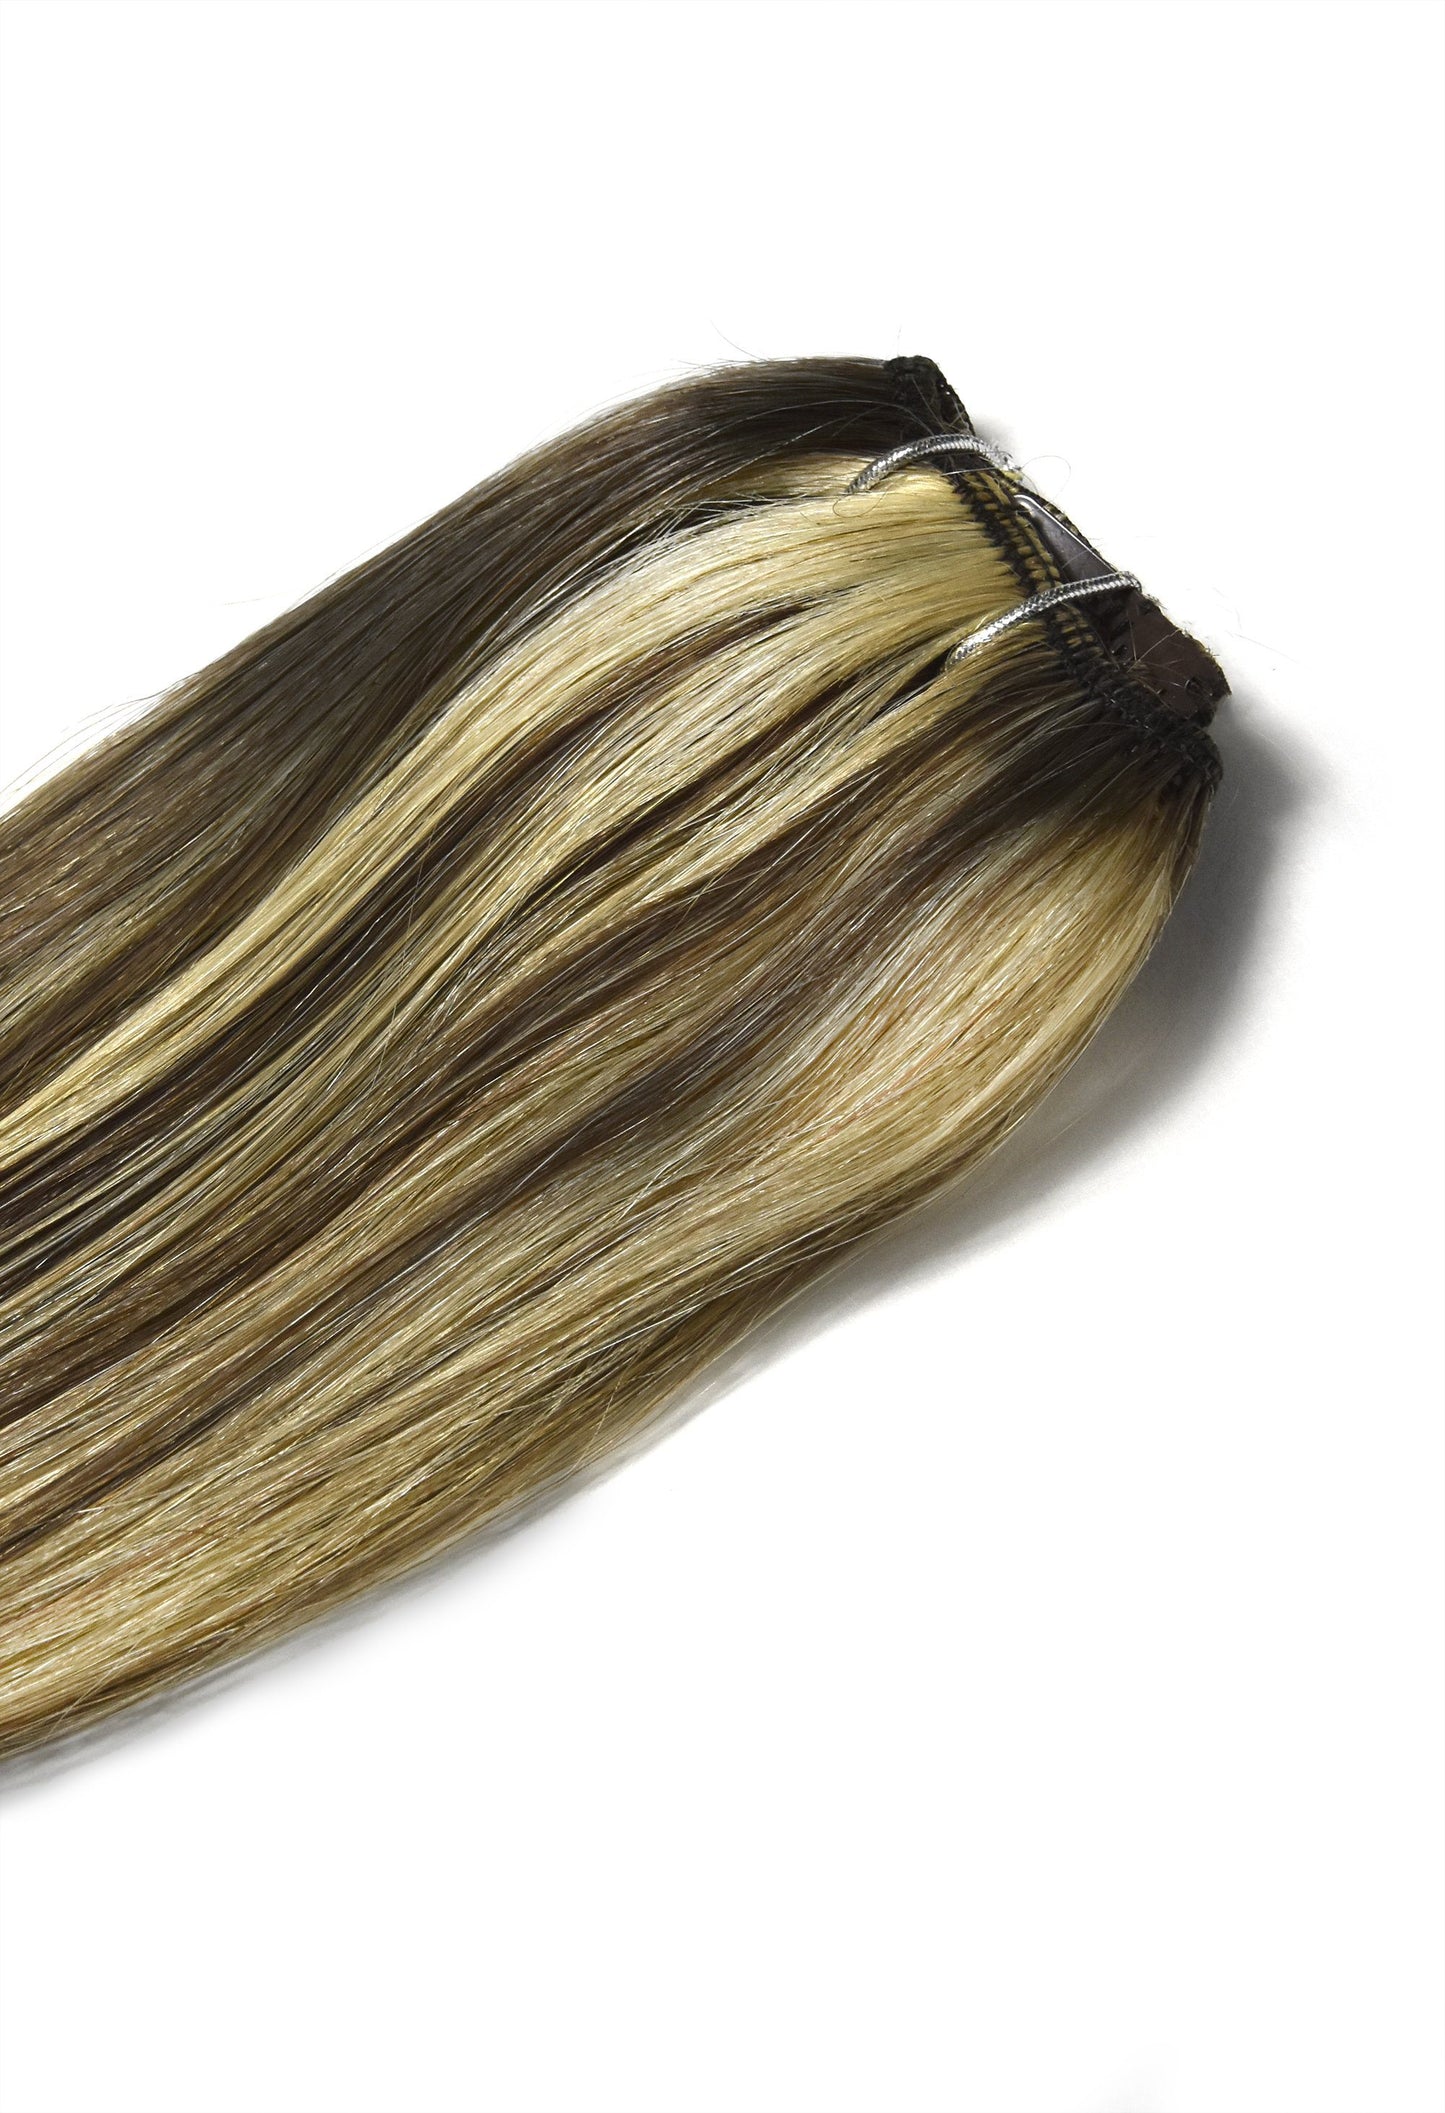 One Piece Top-up Remy Clip in Human Hair Extensions - Ash Brown/Bleach Blonde Mix (#9/613) One Piece Clip In Hair Extensions cliphair 